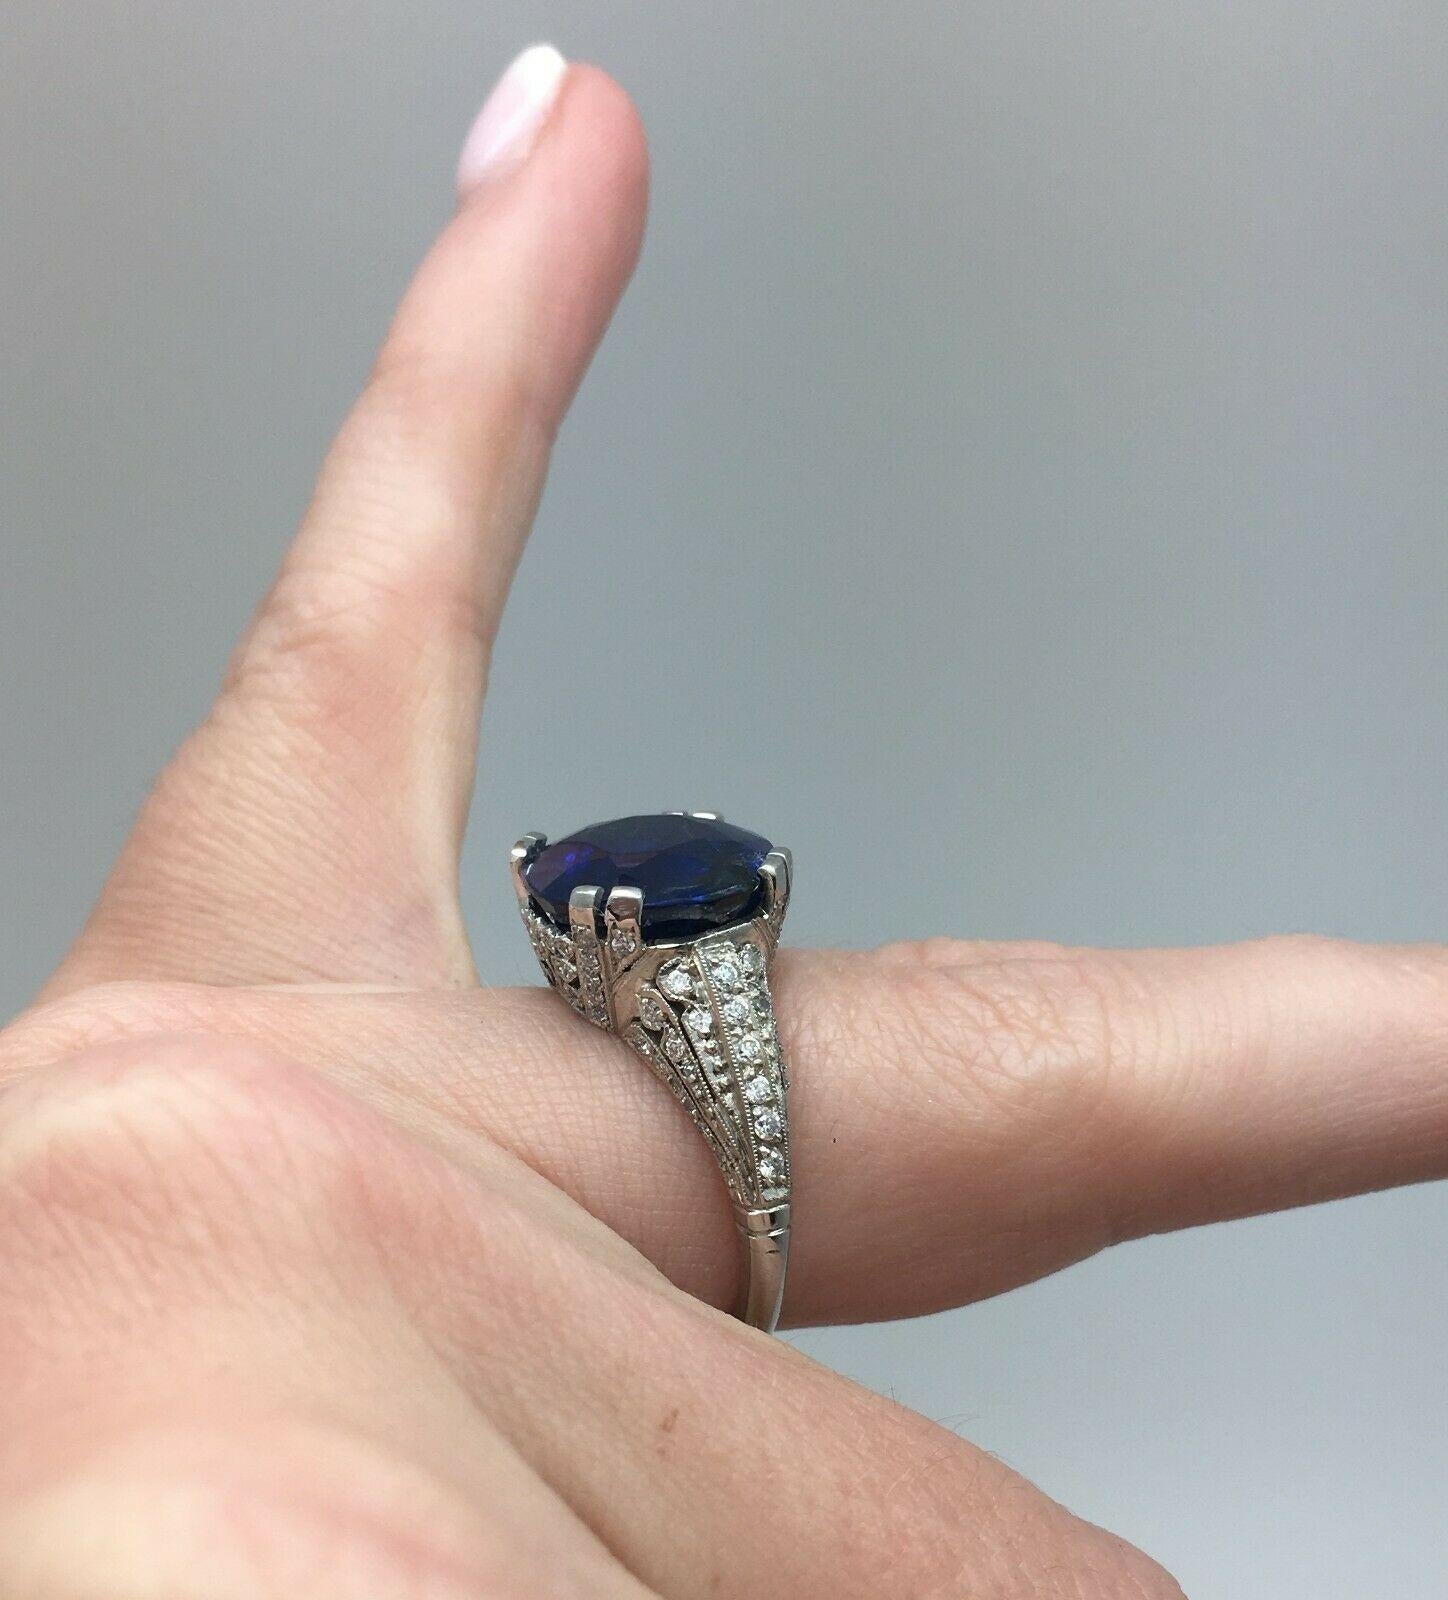 Estate Antique Art Deco GIA Certified 11.91 Carat Burma Sapphire Diamond Ring In Excellent Condition For Sale In Houston, TX